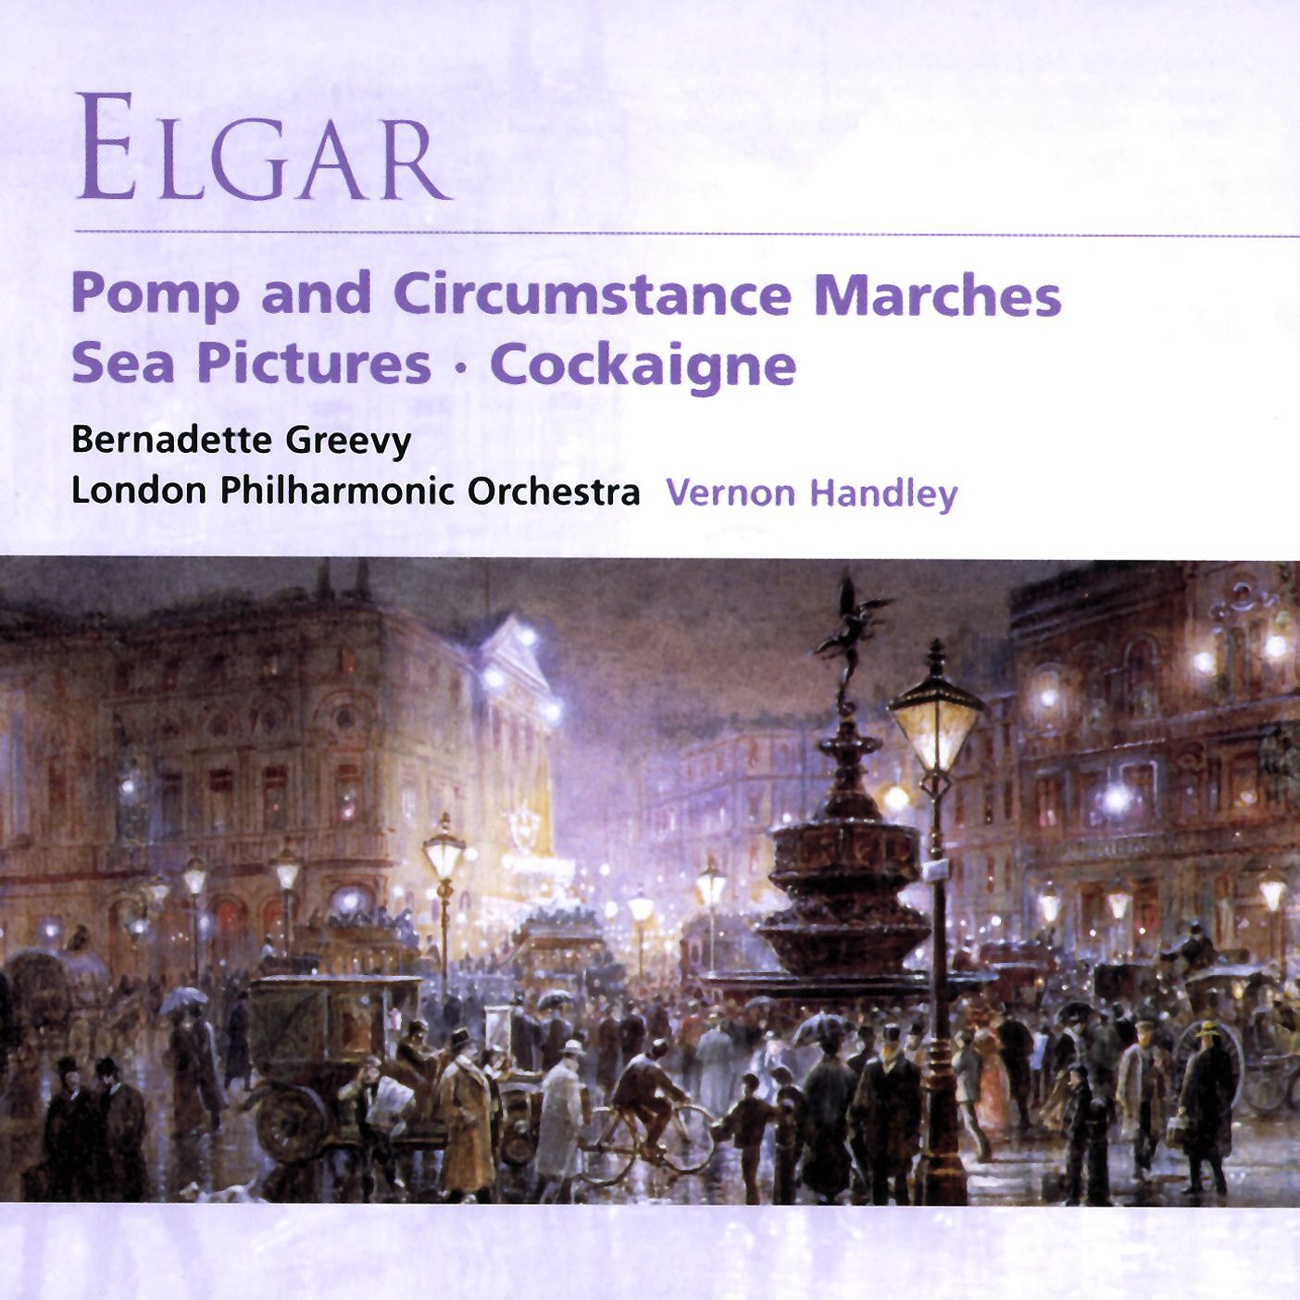 Pomp and Circumstance - Military Marches Op. 39: No. 1 in D